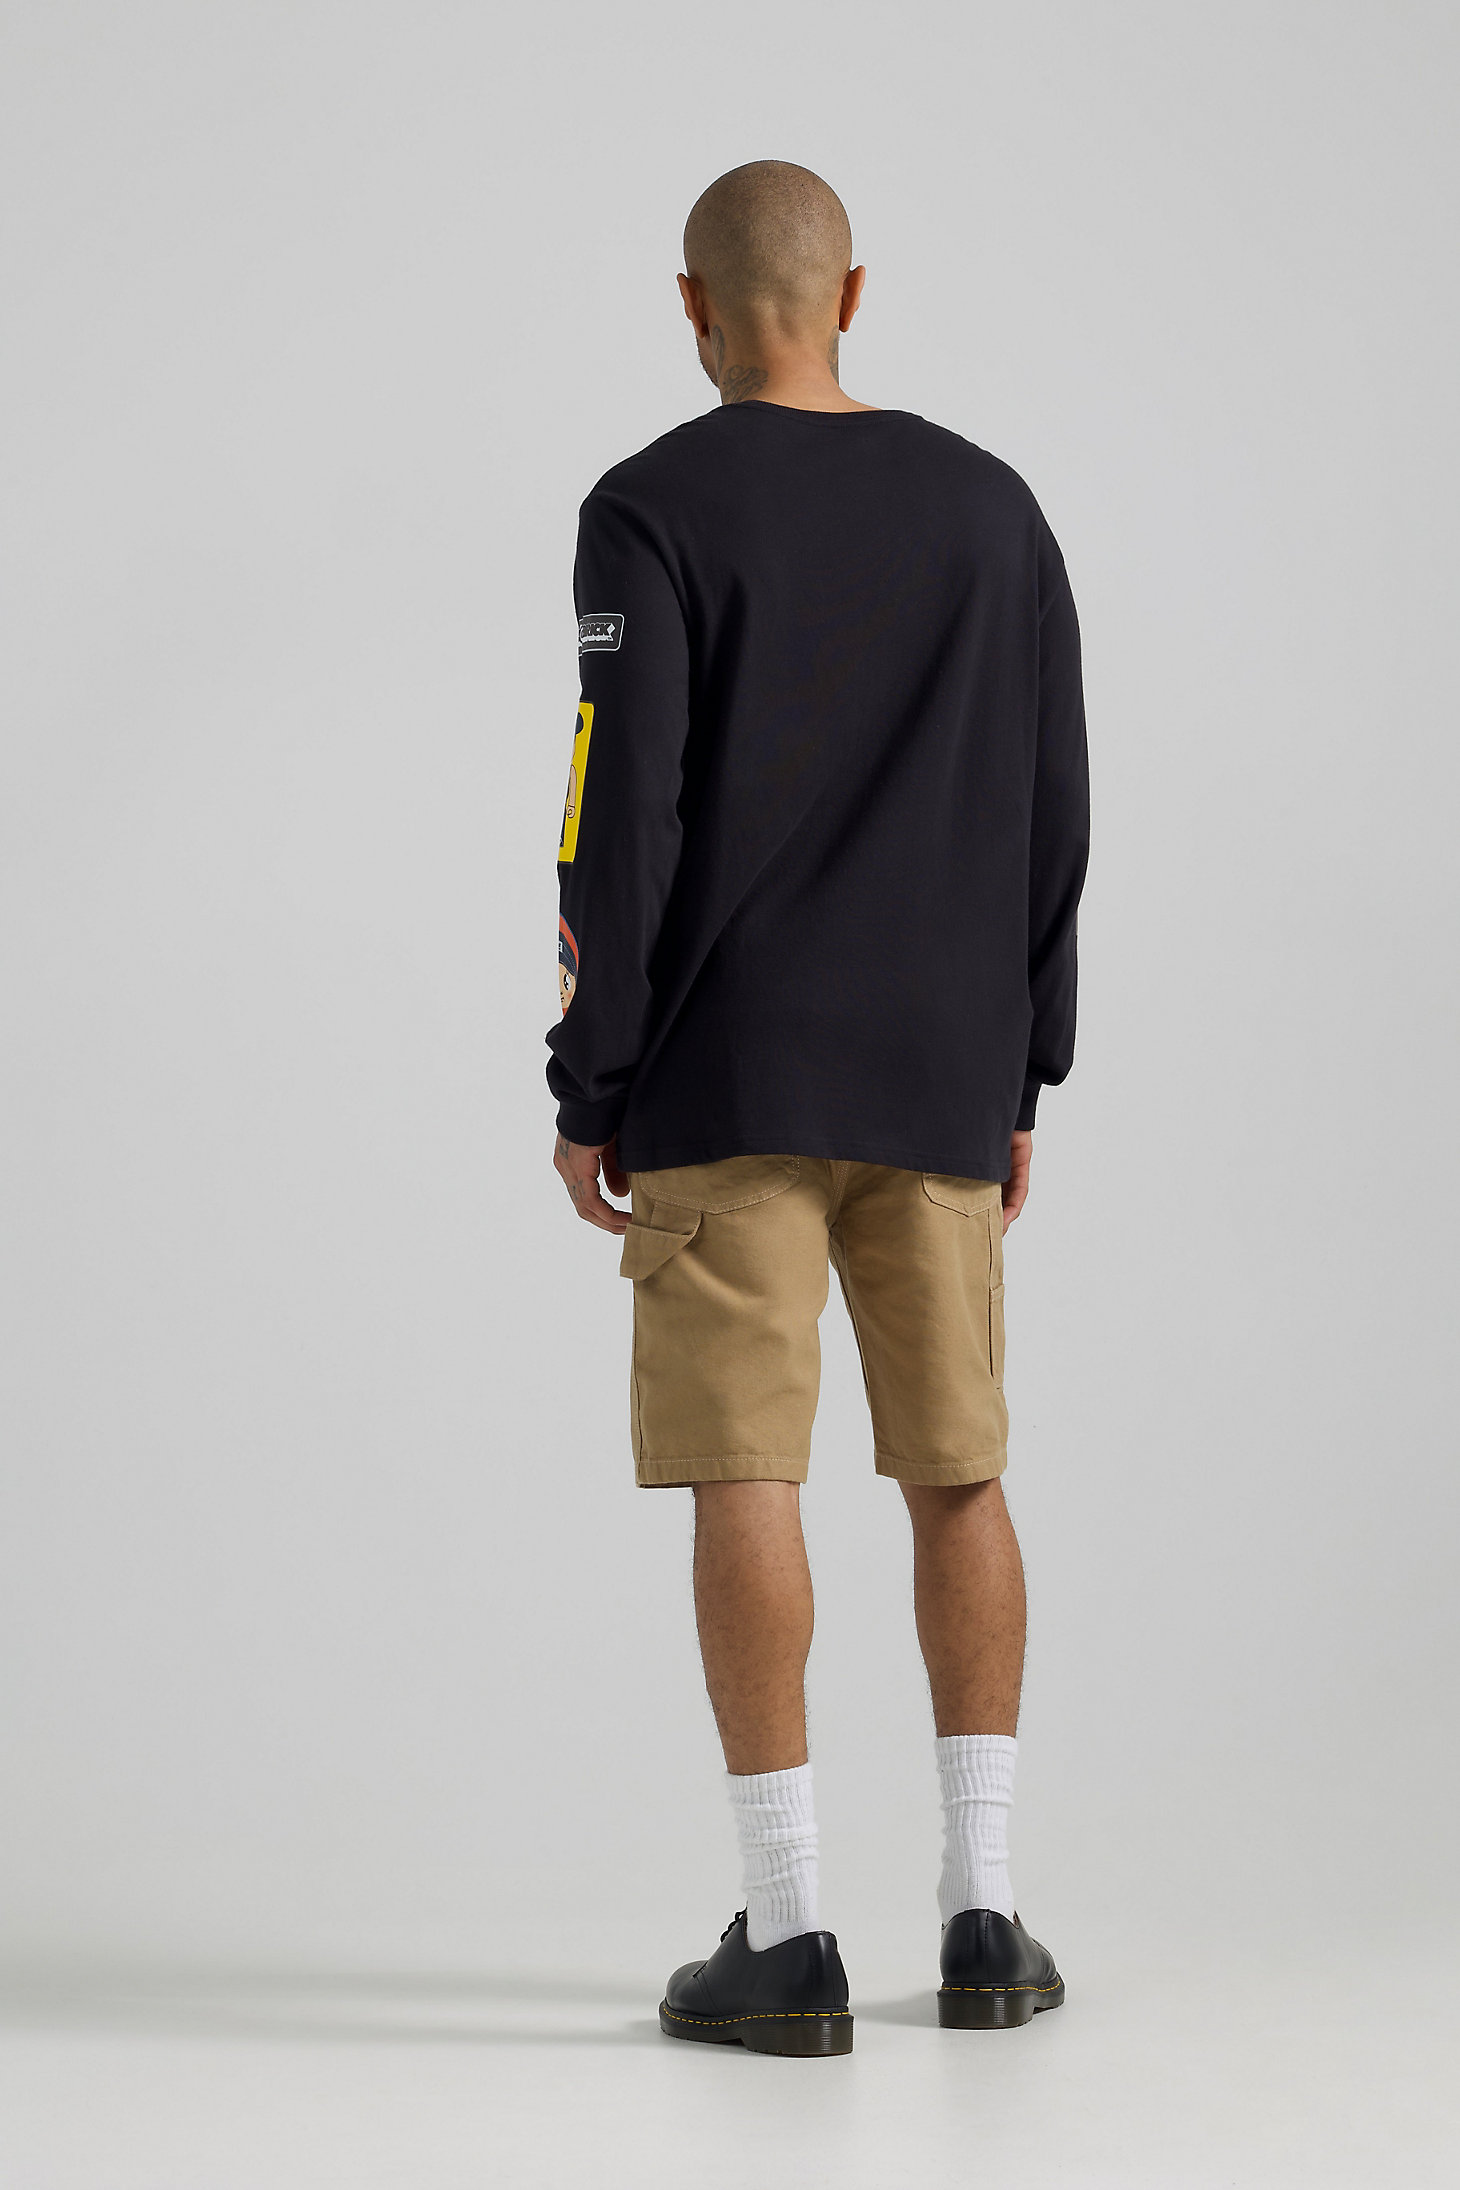 Men’s Lee x BE@RBRICK Relaxed Fit Long Sleeve Tee in Washed Black alternative view 3